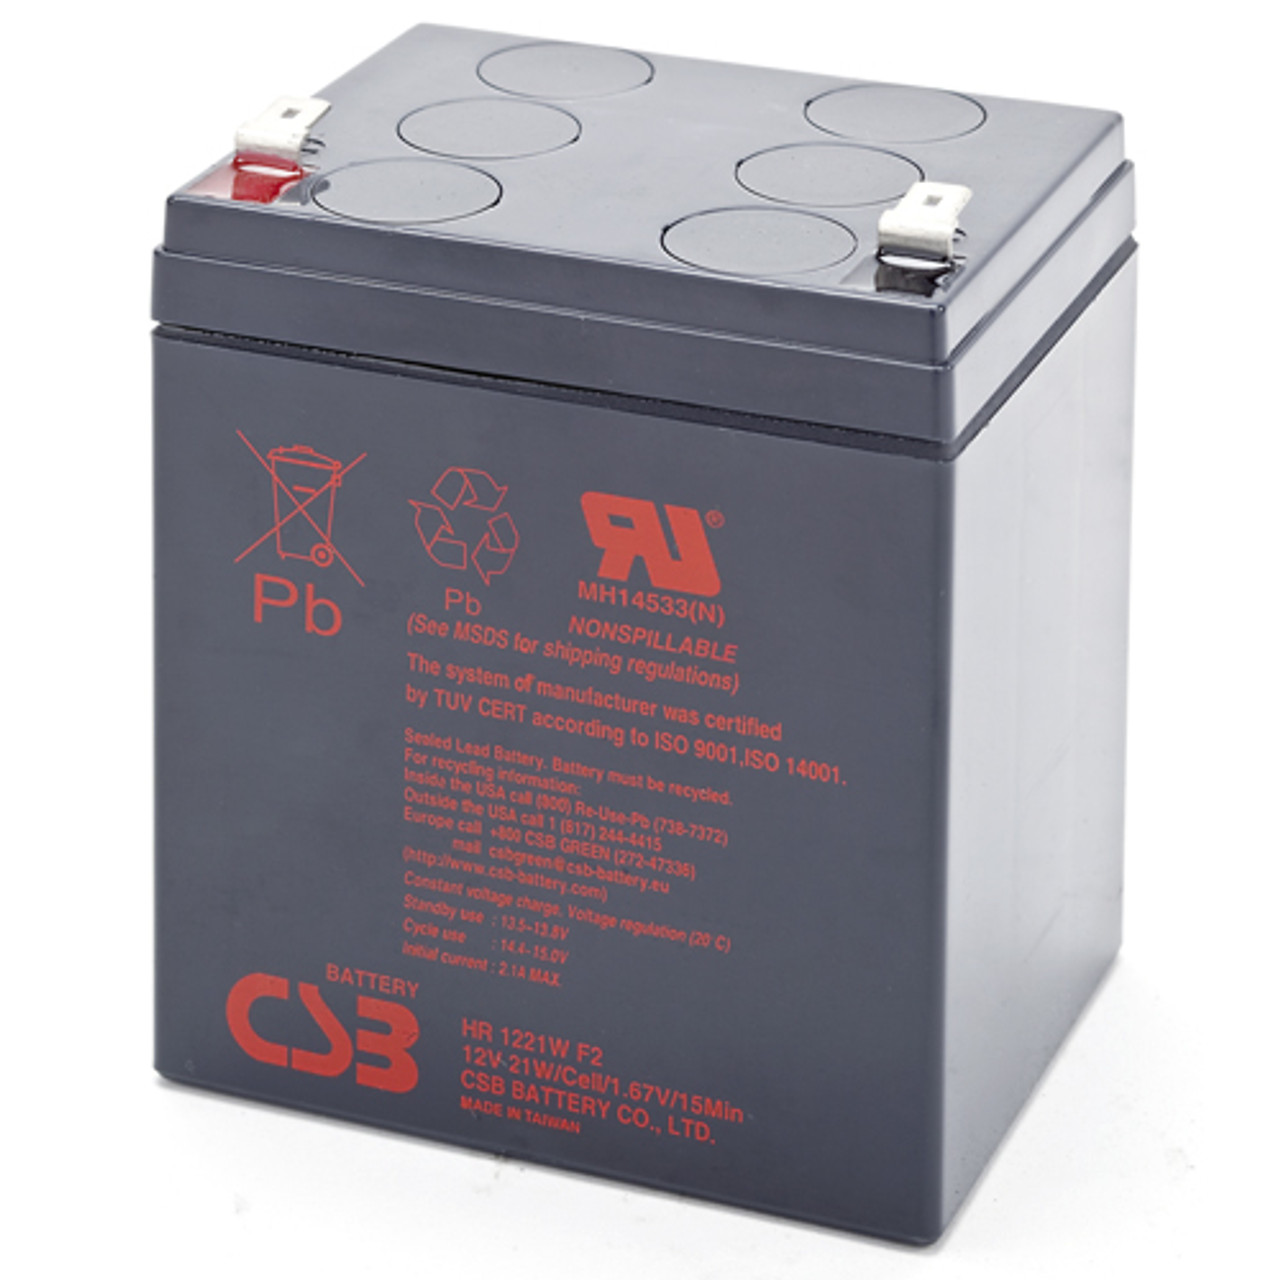 This is an AJC Brand Replacement CyberPower CP 12V 3.2Ah UPS Battery